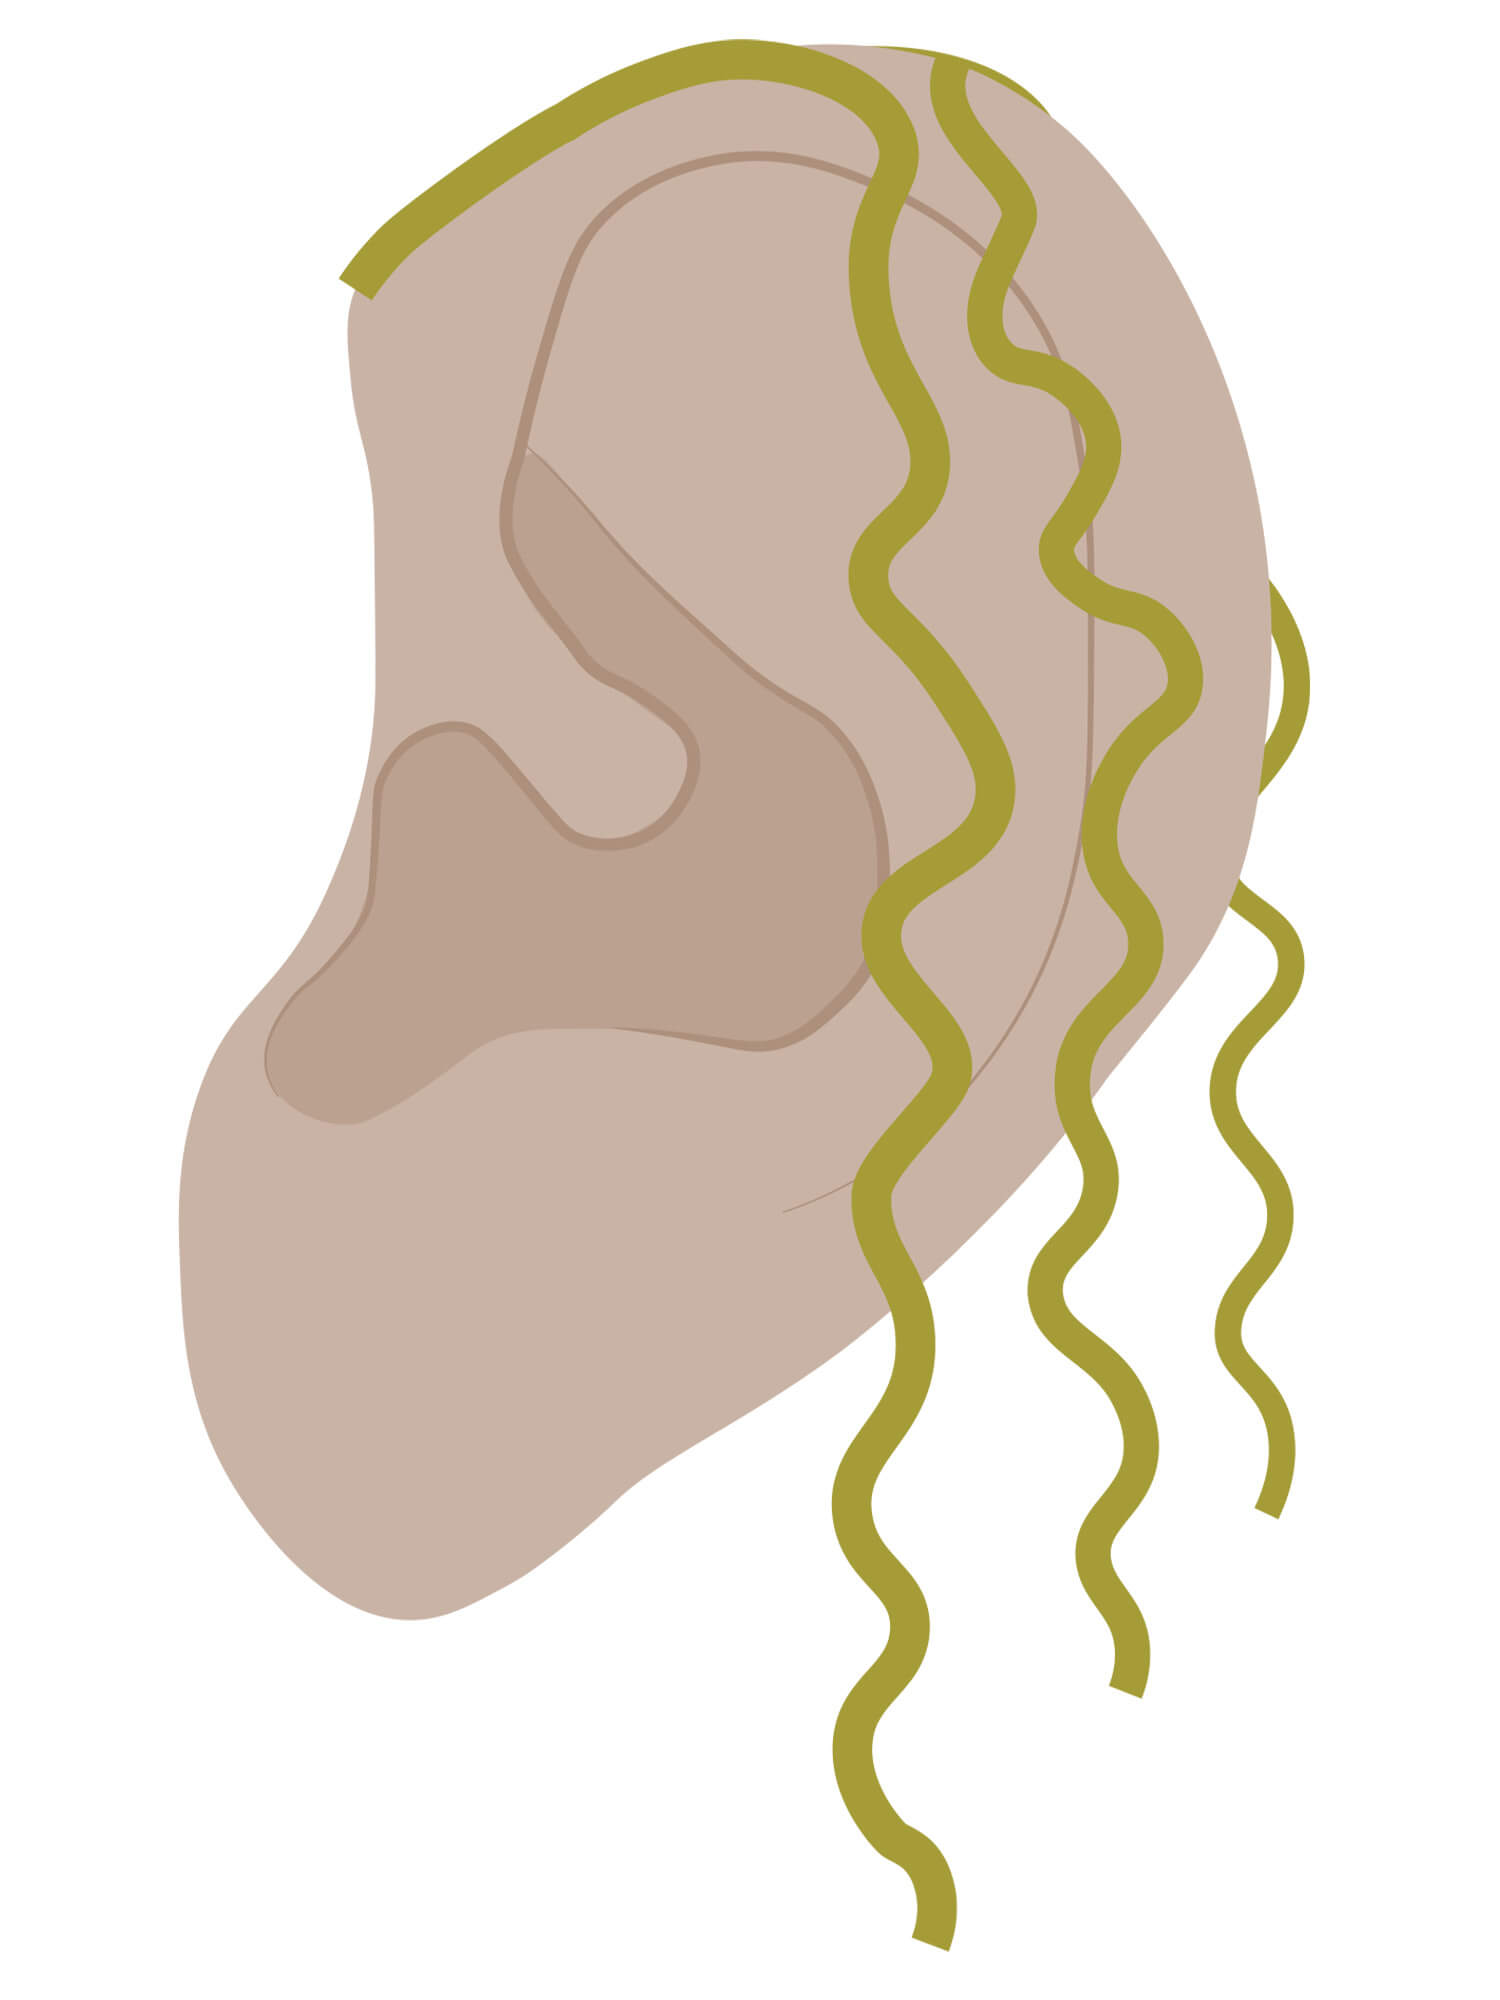 Illustrated ear with noodles on